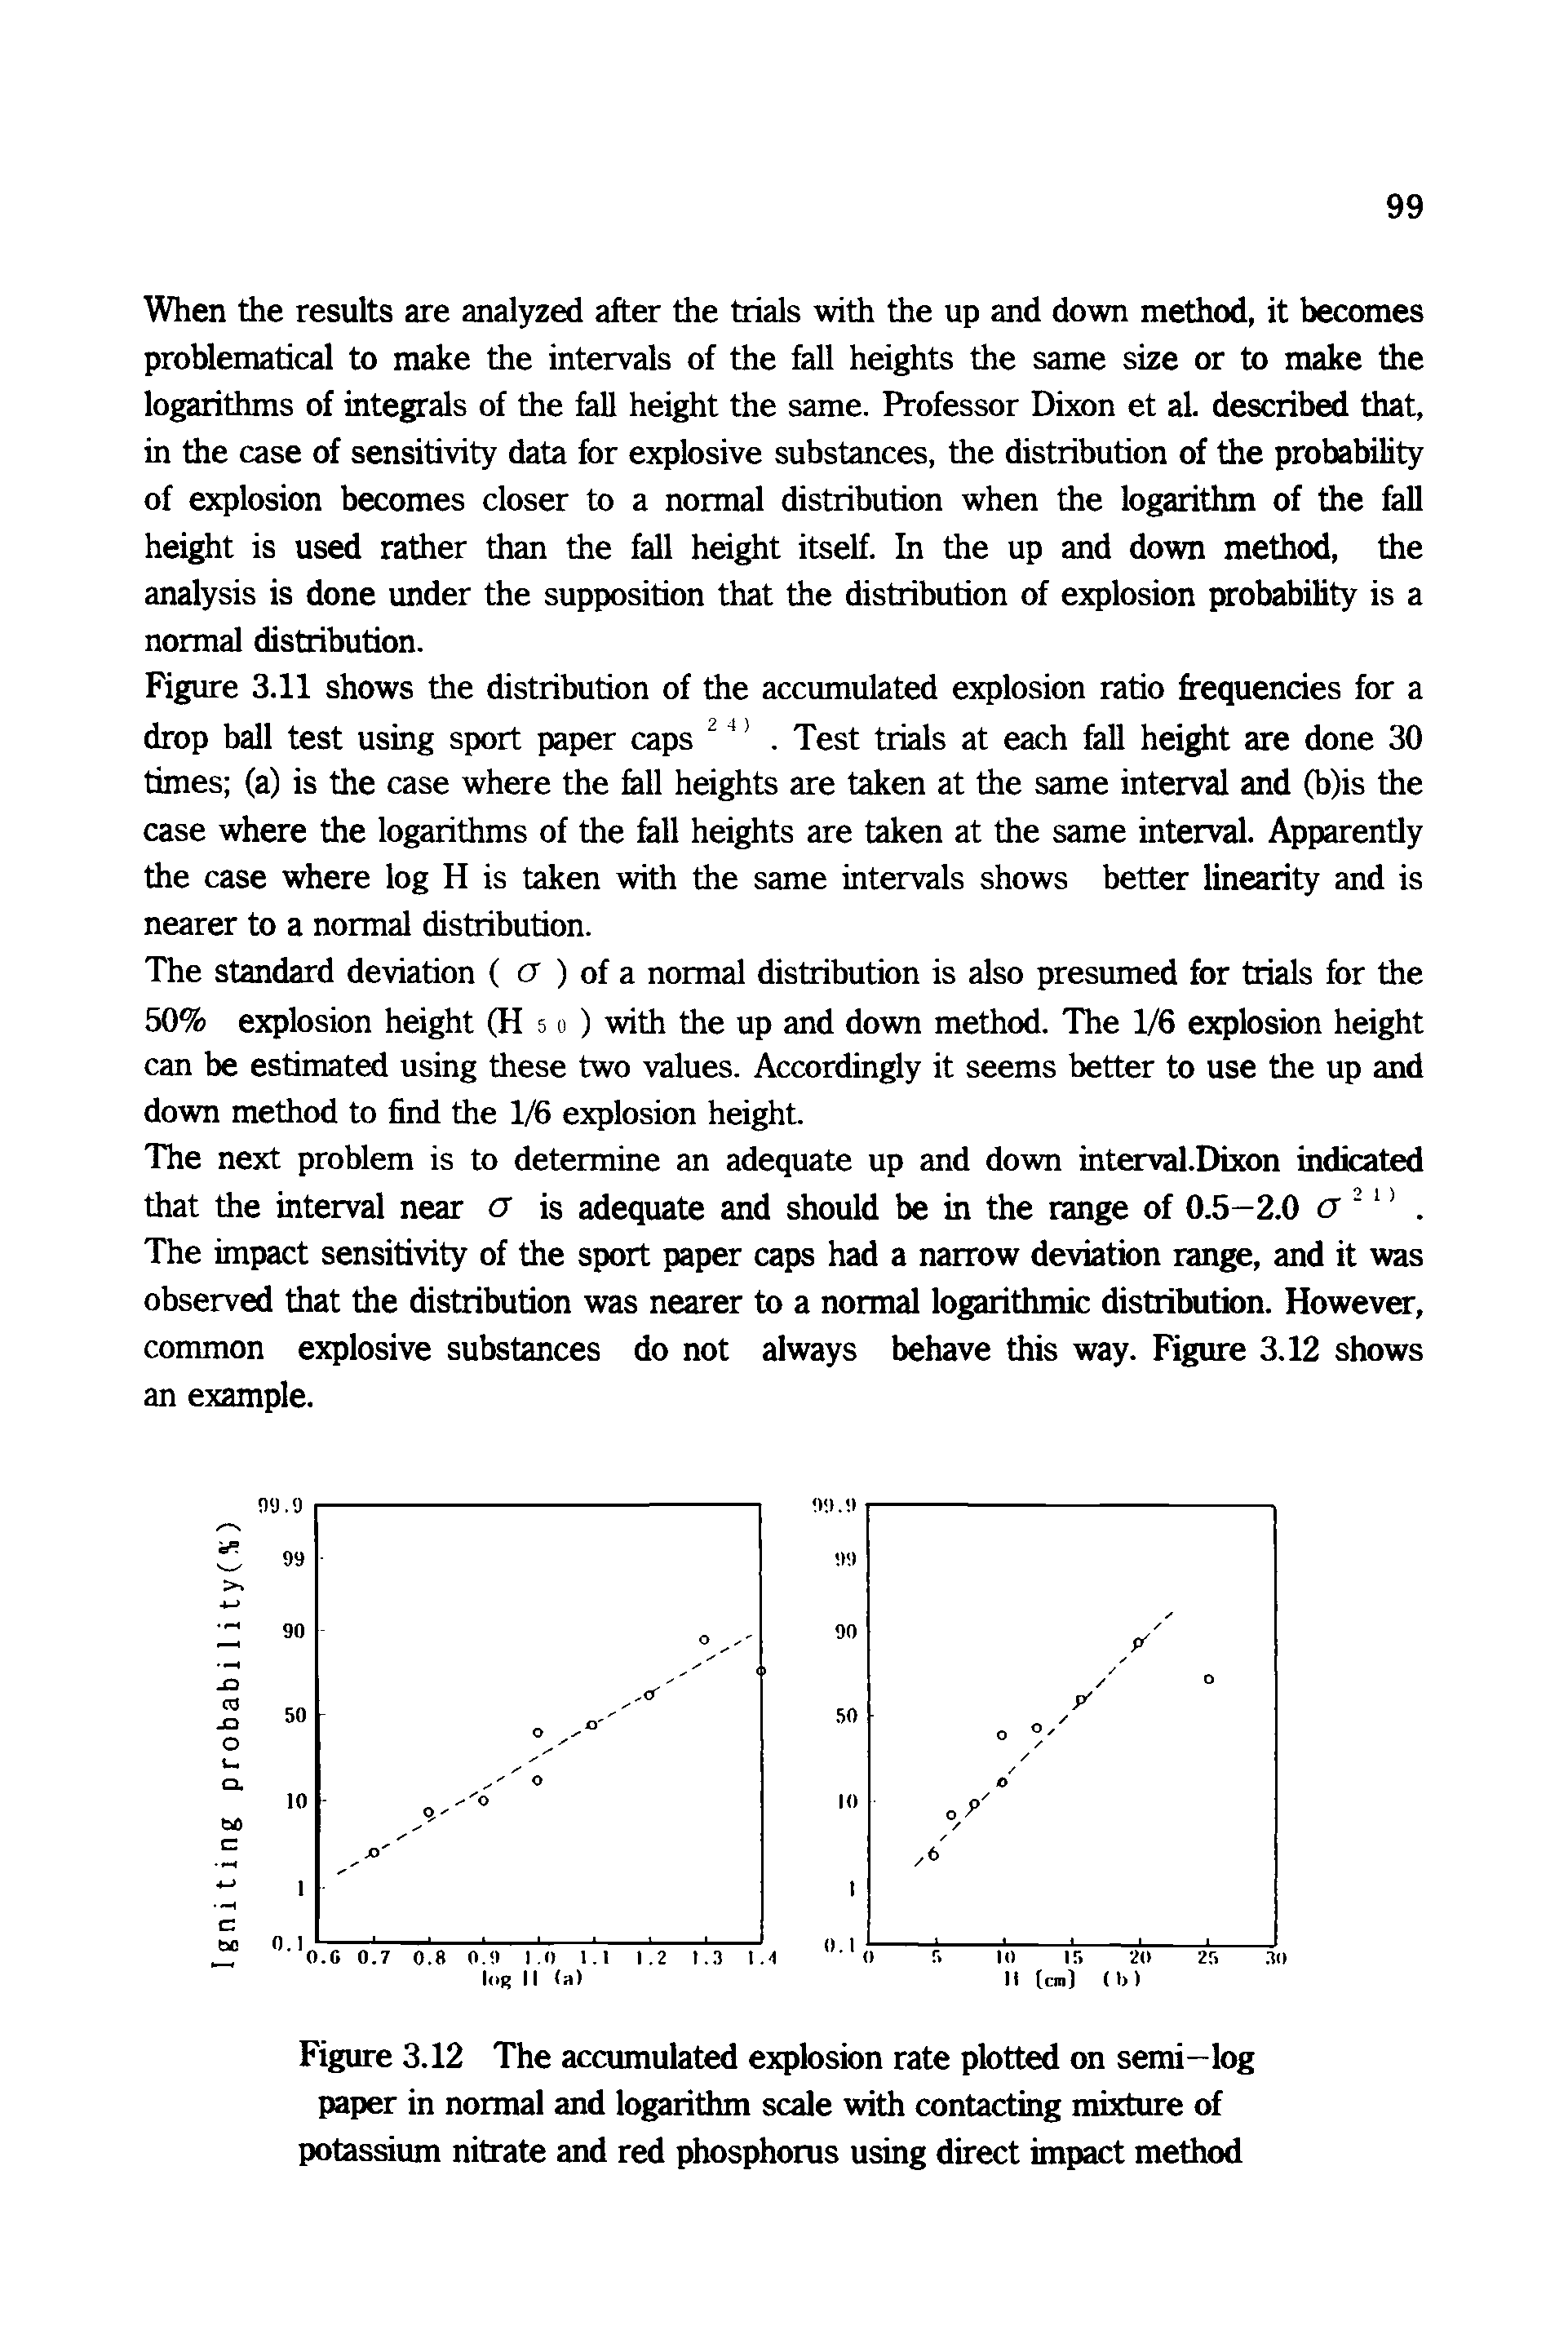 Figure 3.12 The accumulated explosion rate plotted on semi—log paper in normal and logarithm scale with contacting mixture of potassium nitrate and red phosphorus using direct impact method...